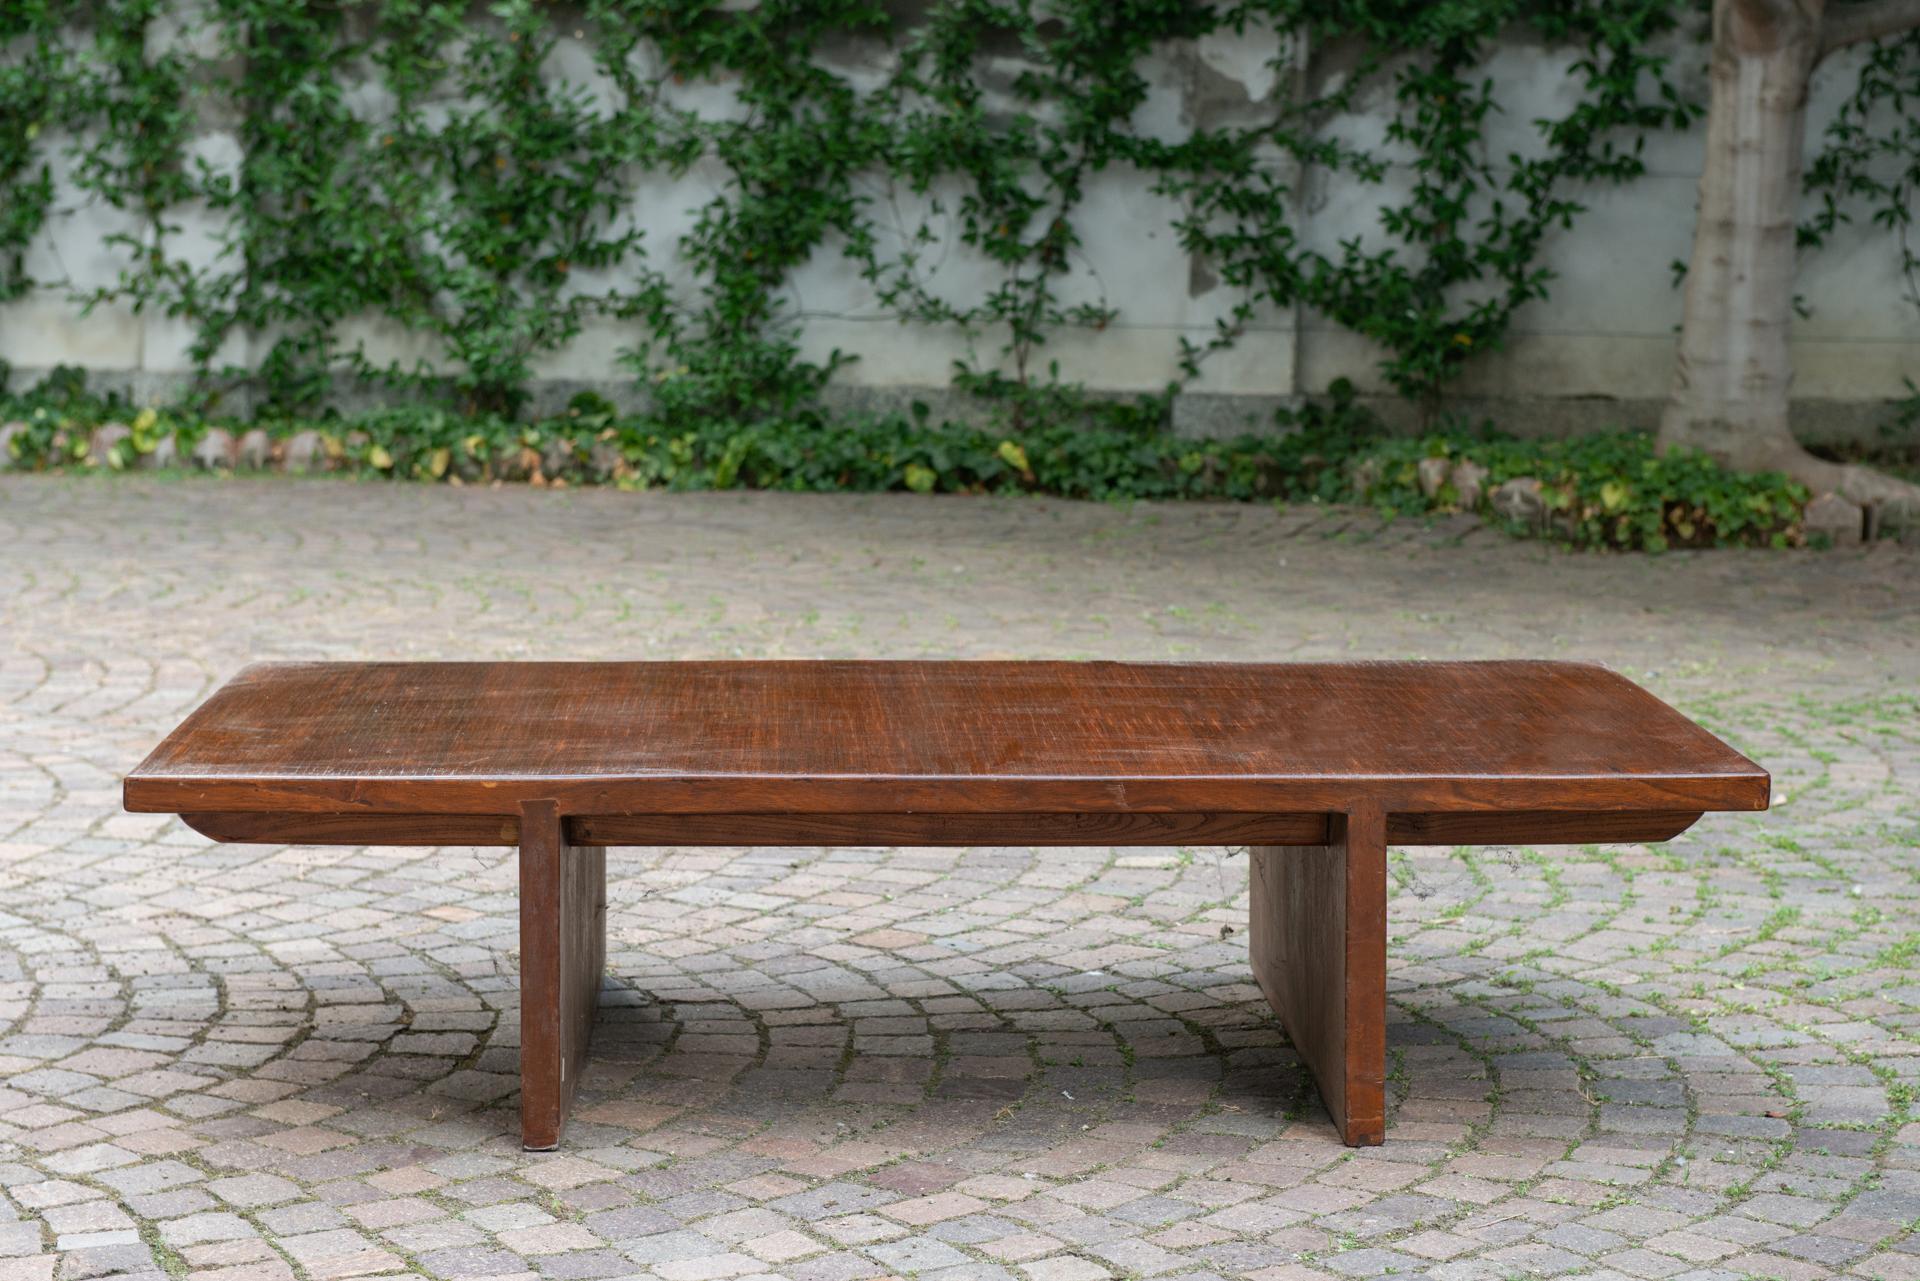 M/1364 -  Long modern coffee table in pressed bamboo,  never used, perfect for a sitting room, minimalist taste.
Good price because I want to close my activities.
